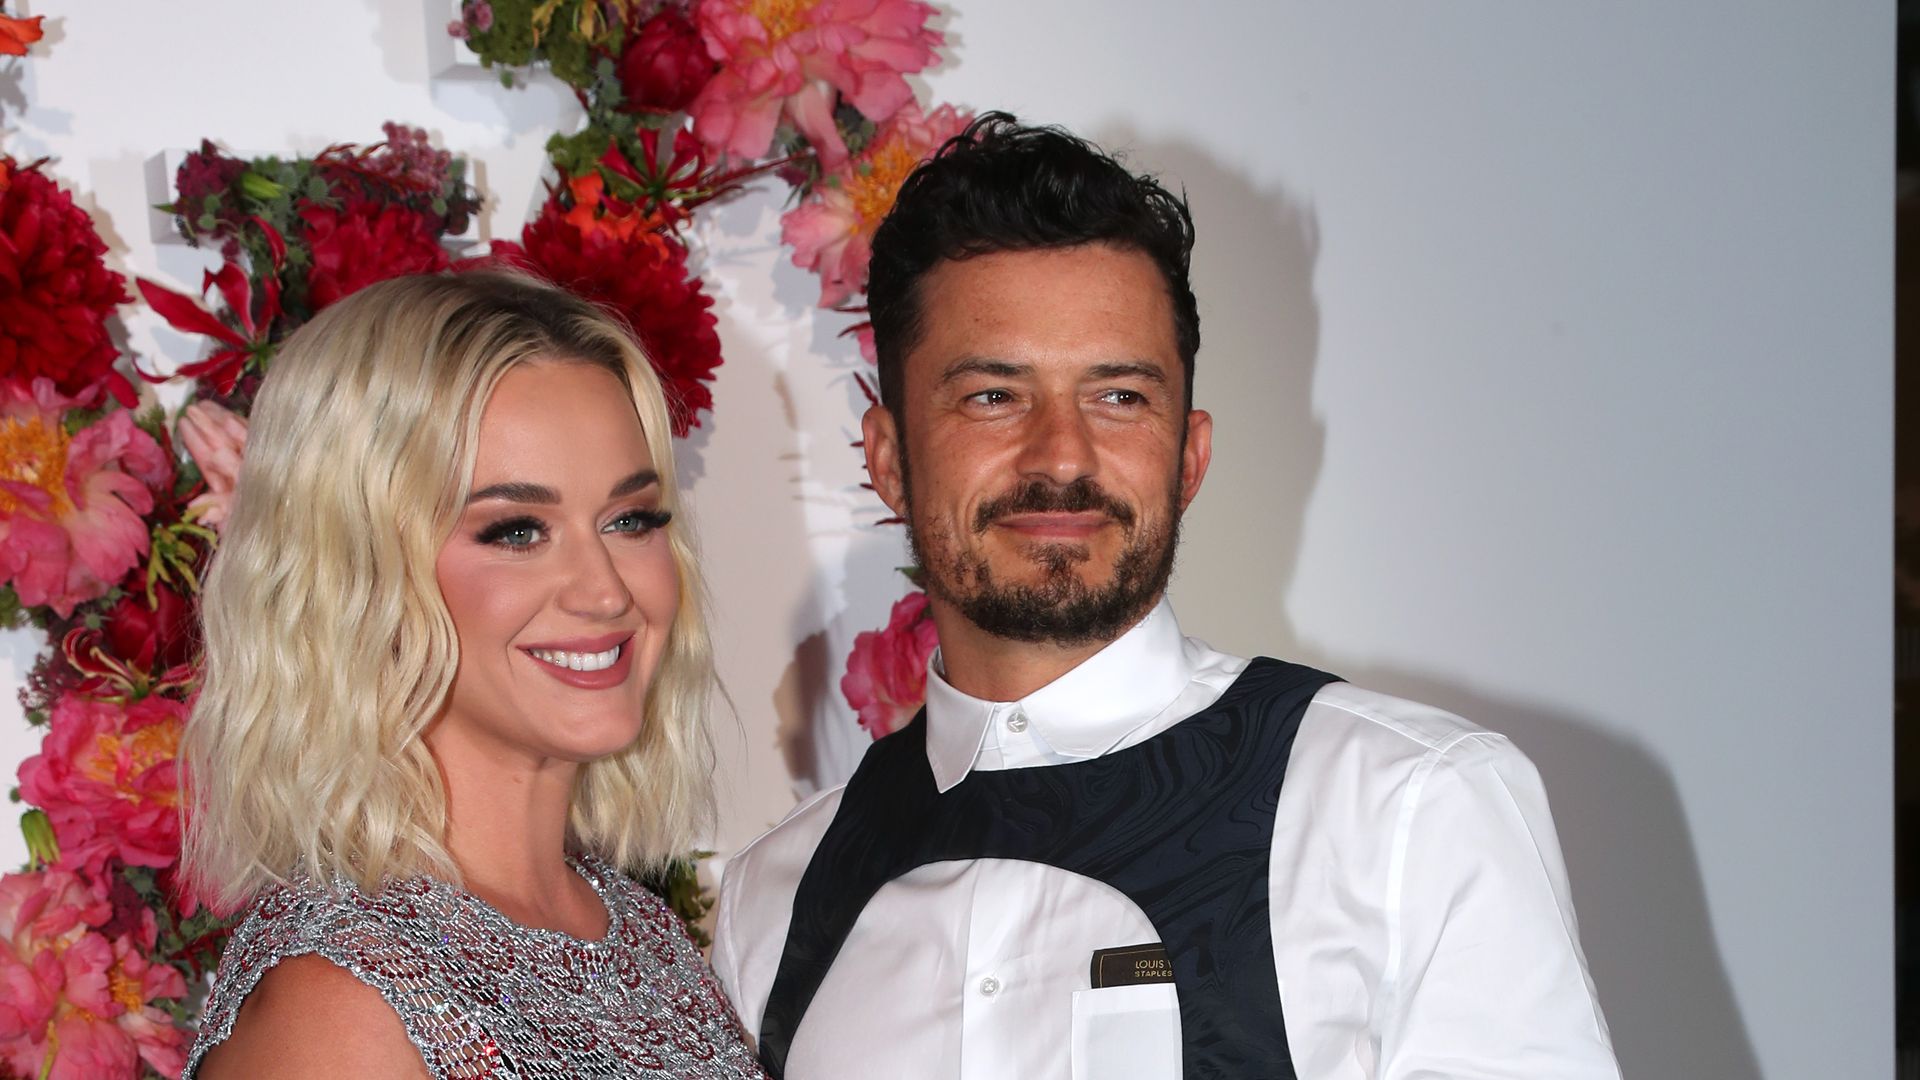 Katy Perry and Orlando Bloom attend Louis Vuitton Parfum hosts dinner at Fondation Louis Vuitton on July 05, 2021 in Paris, France